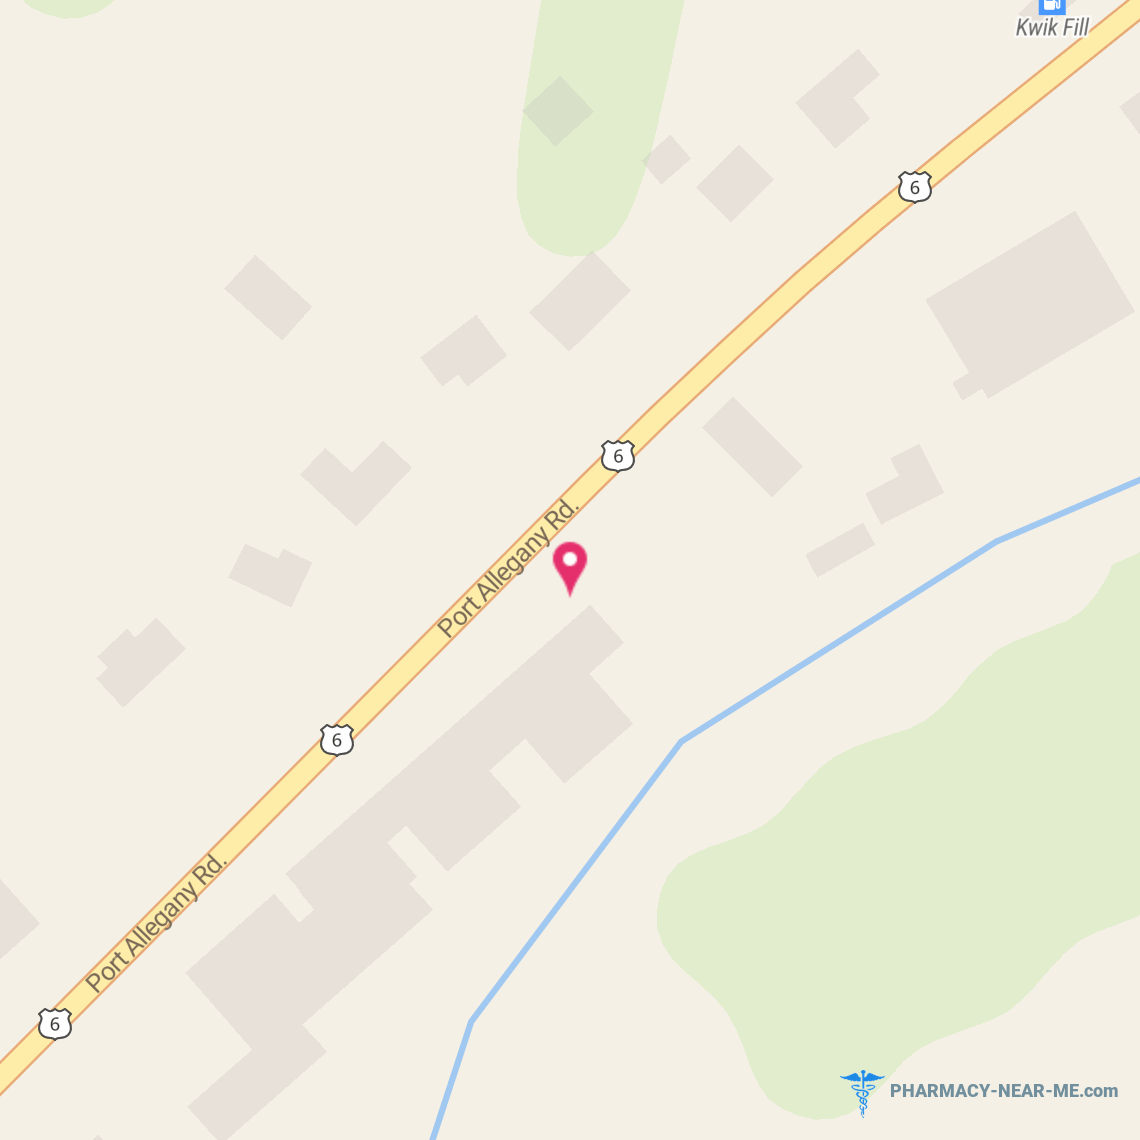 RITE AID PHARMACY 01976 - Pharmacy Hours, Phone, Reviews & Information: 207 Route 6 W, Coudersport, Pennsylvania 16915, United States